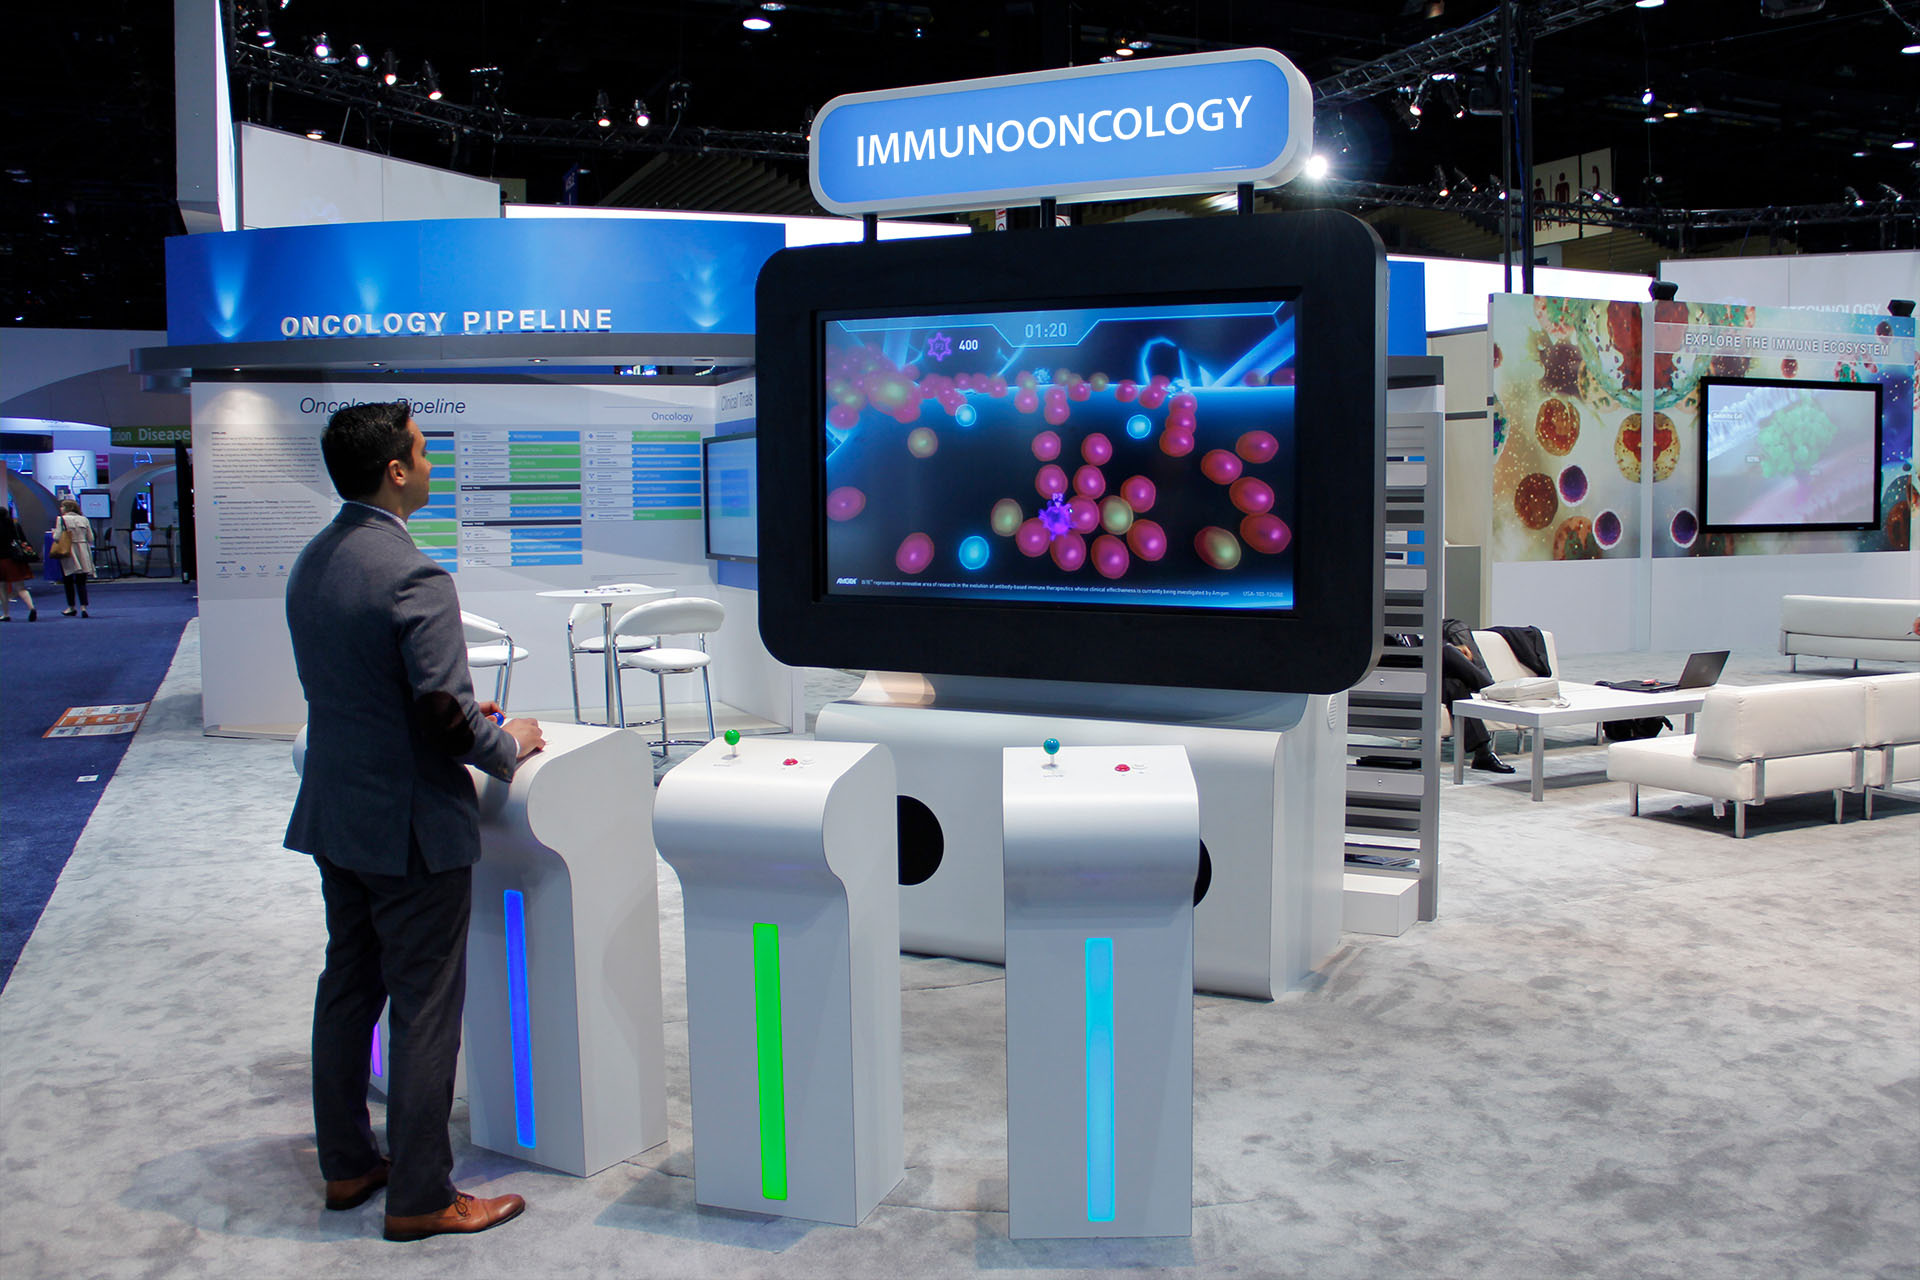 axs-studio-medical-game-congress-booth-oncology-exhibit-asco-2016